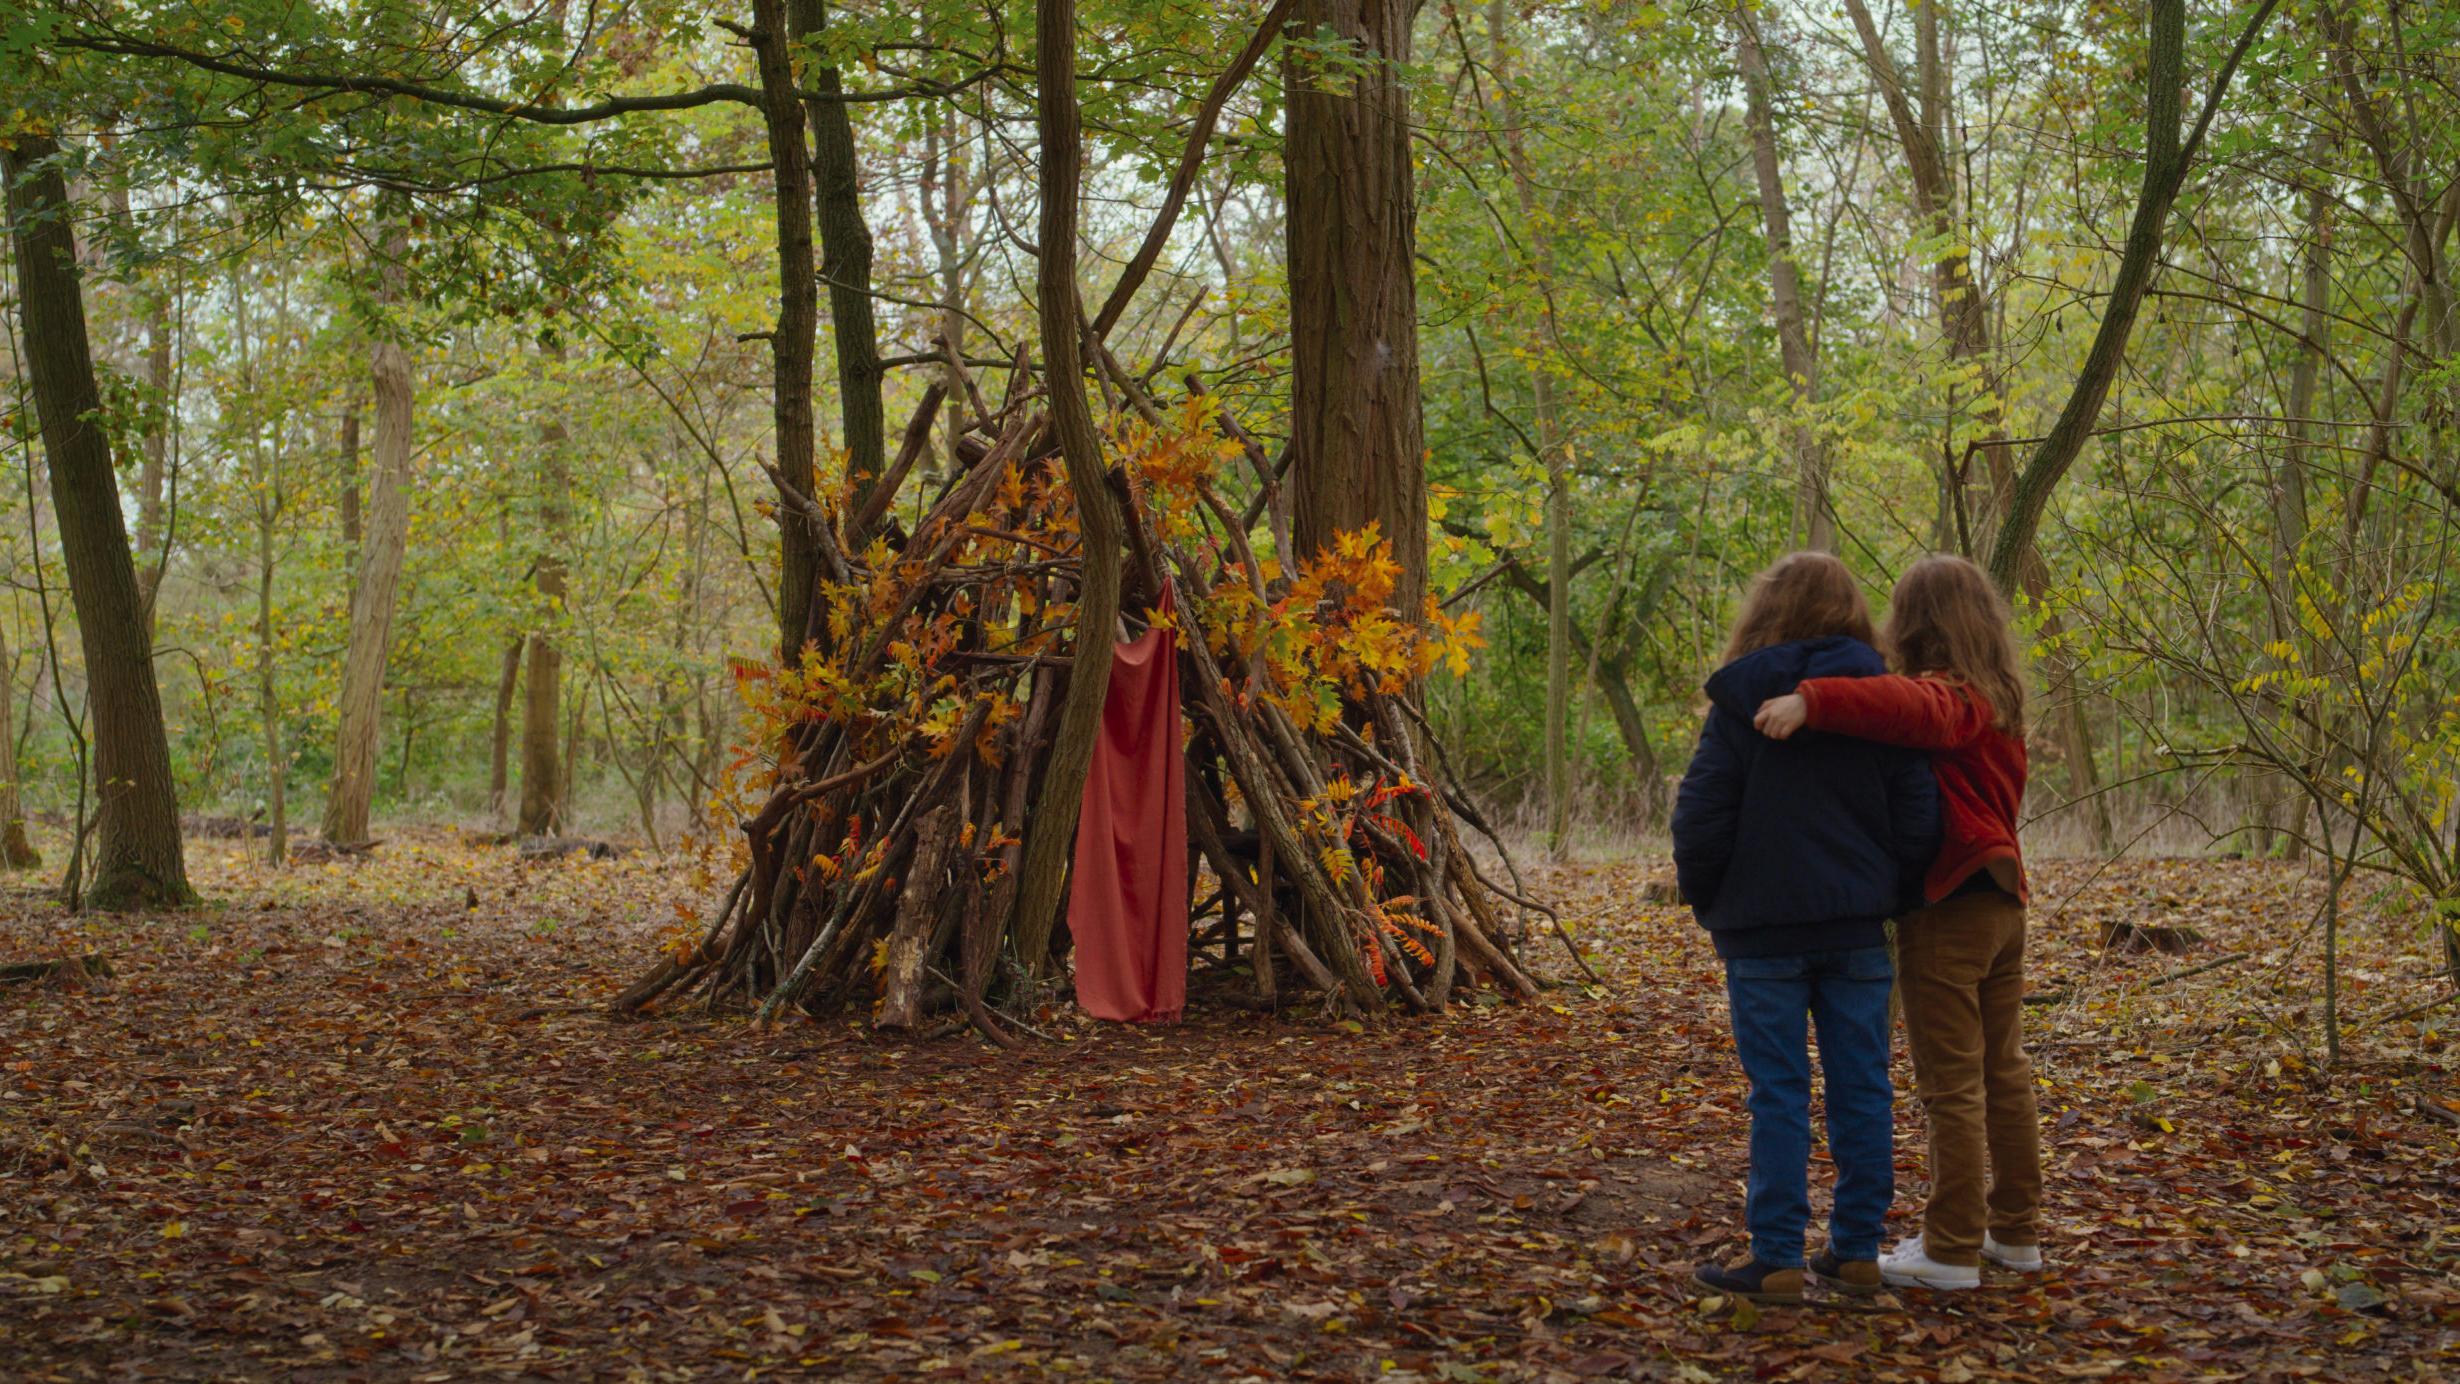 A scene from new film Petite Maman, in cinemas from November 19